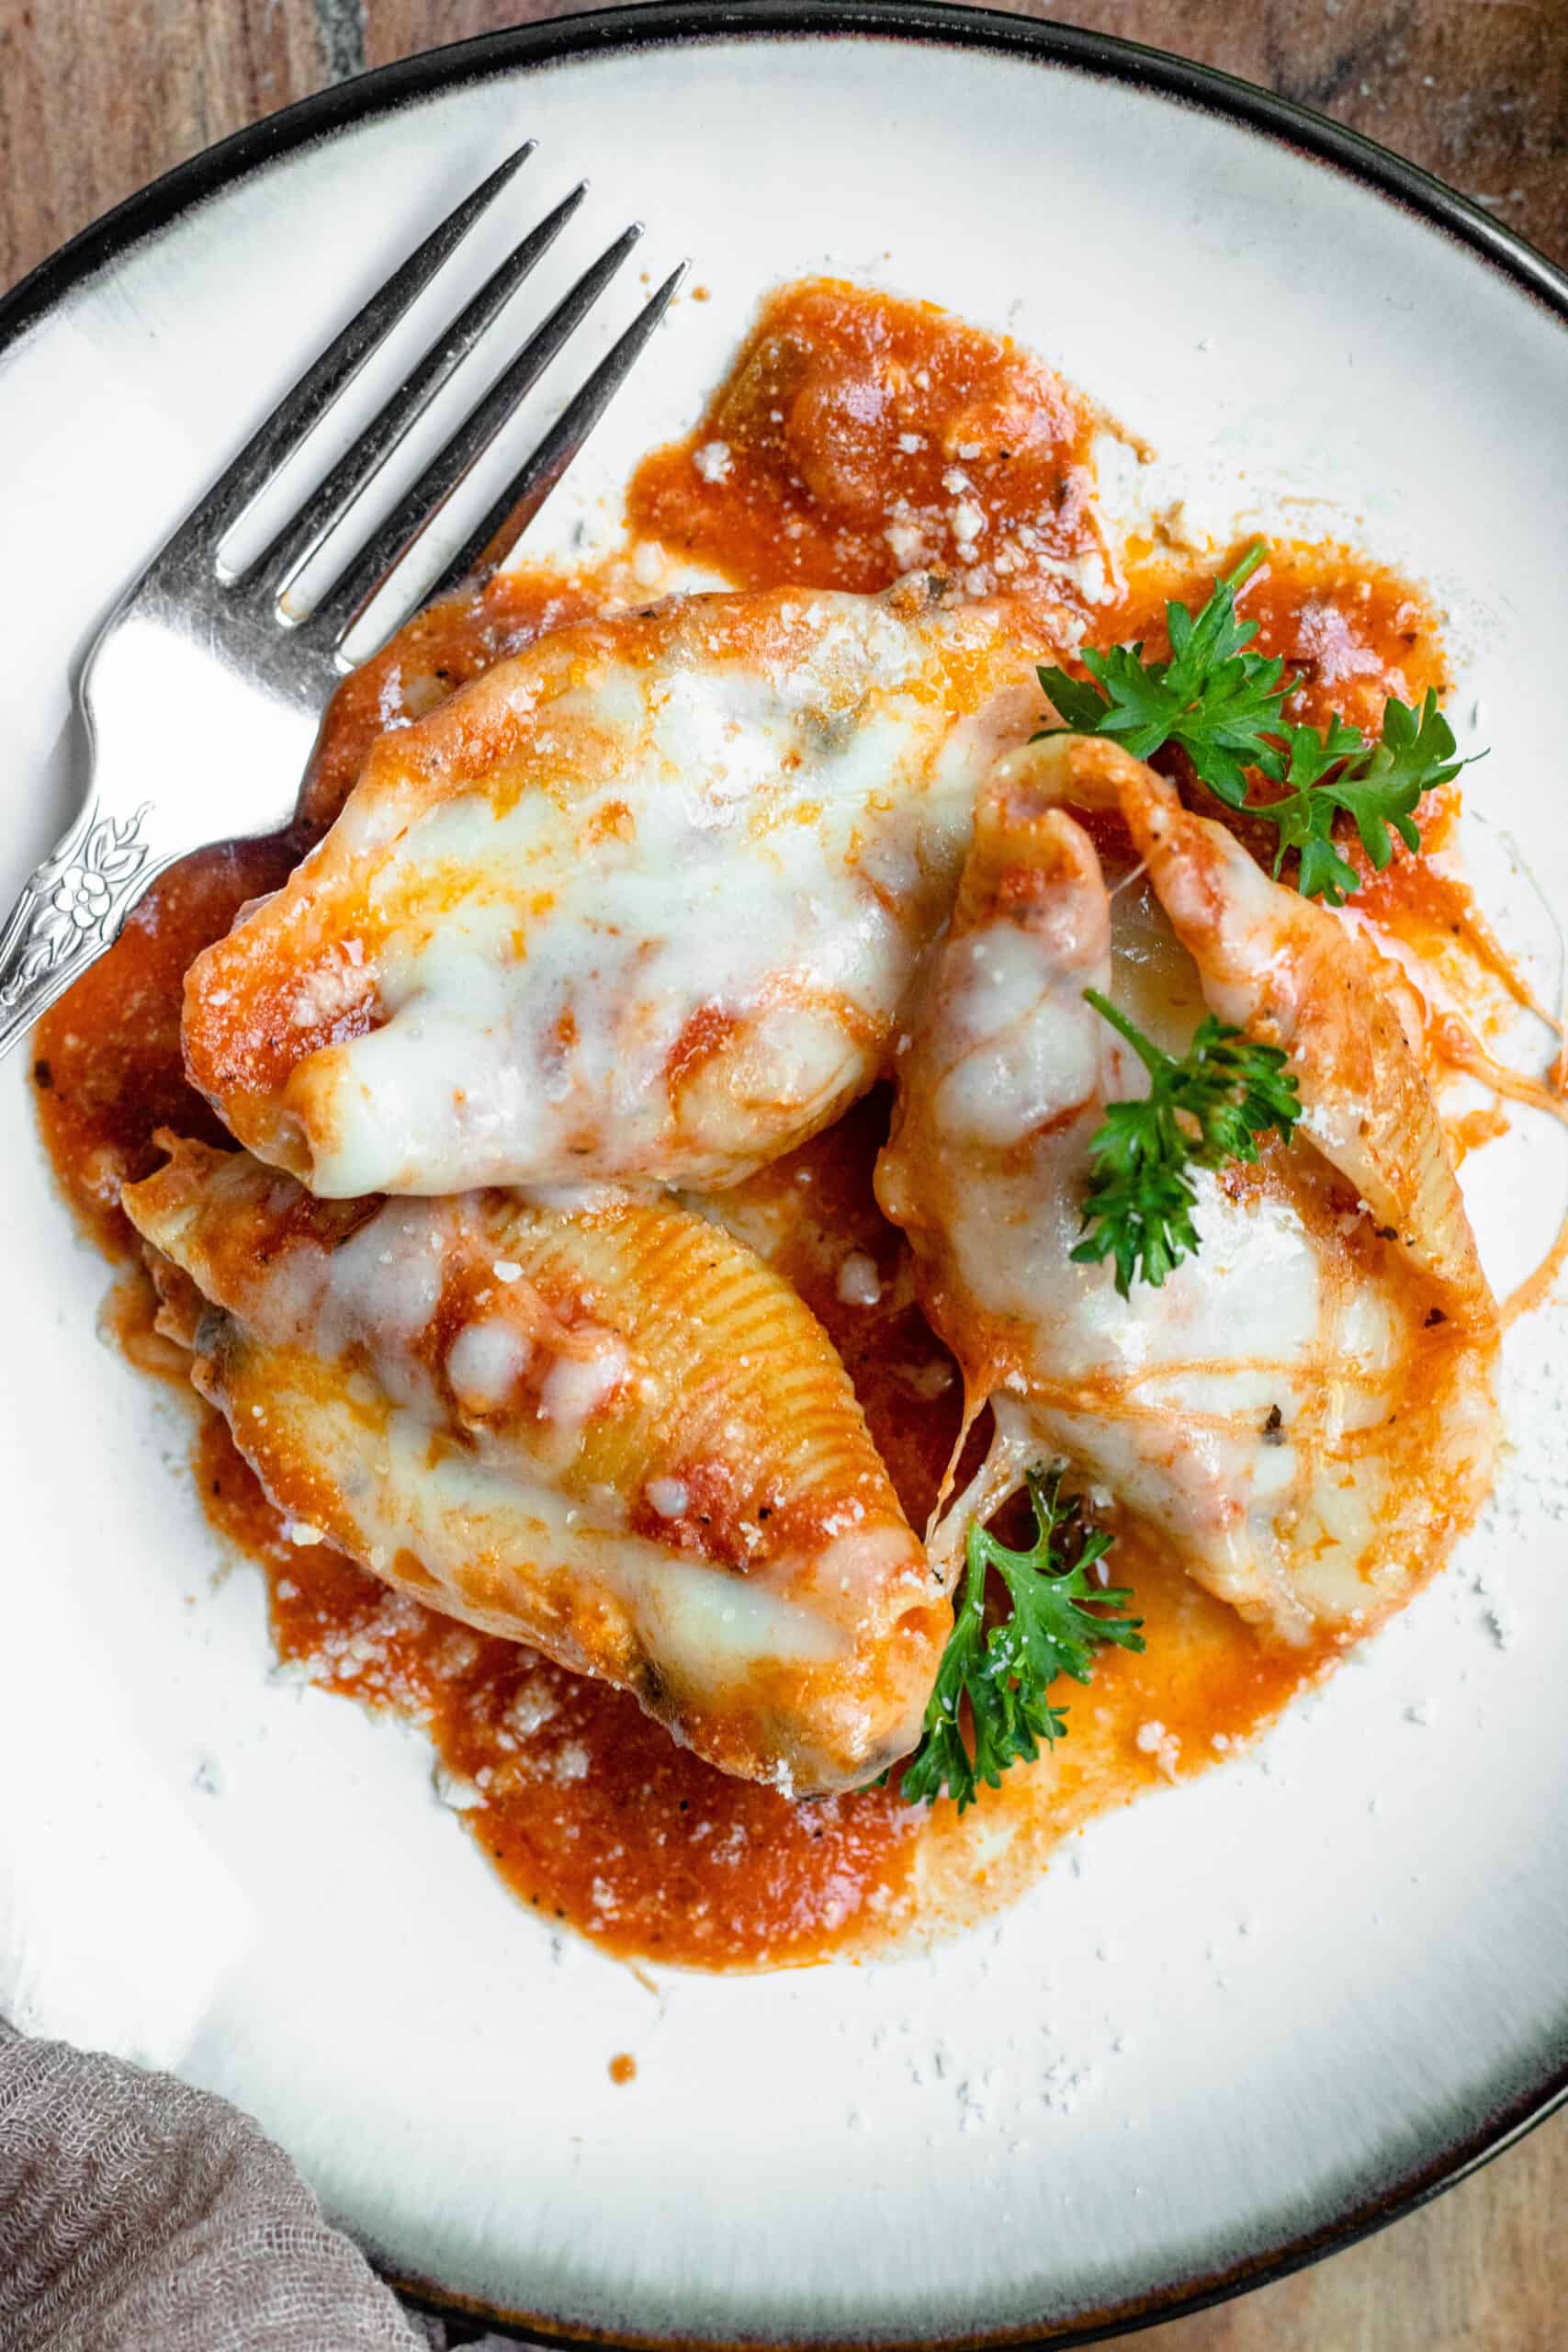 Three stuffed shells on a plate, sprinkled with parmesan cheese and topped with parsley.